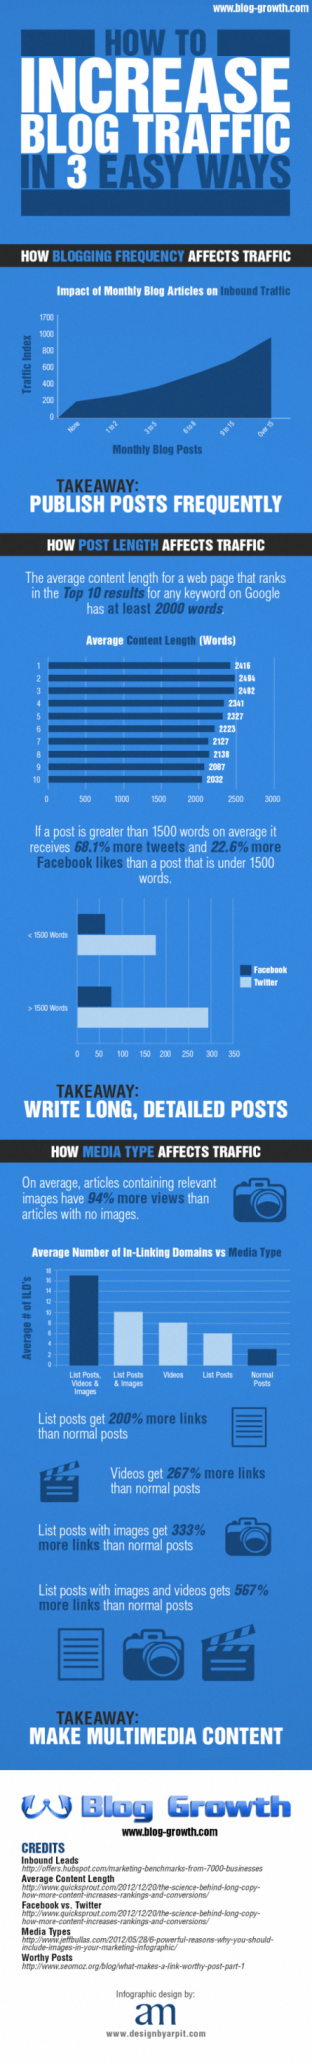 How to increase blog traffic in 3 easy ways